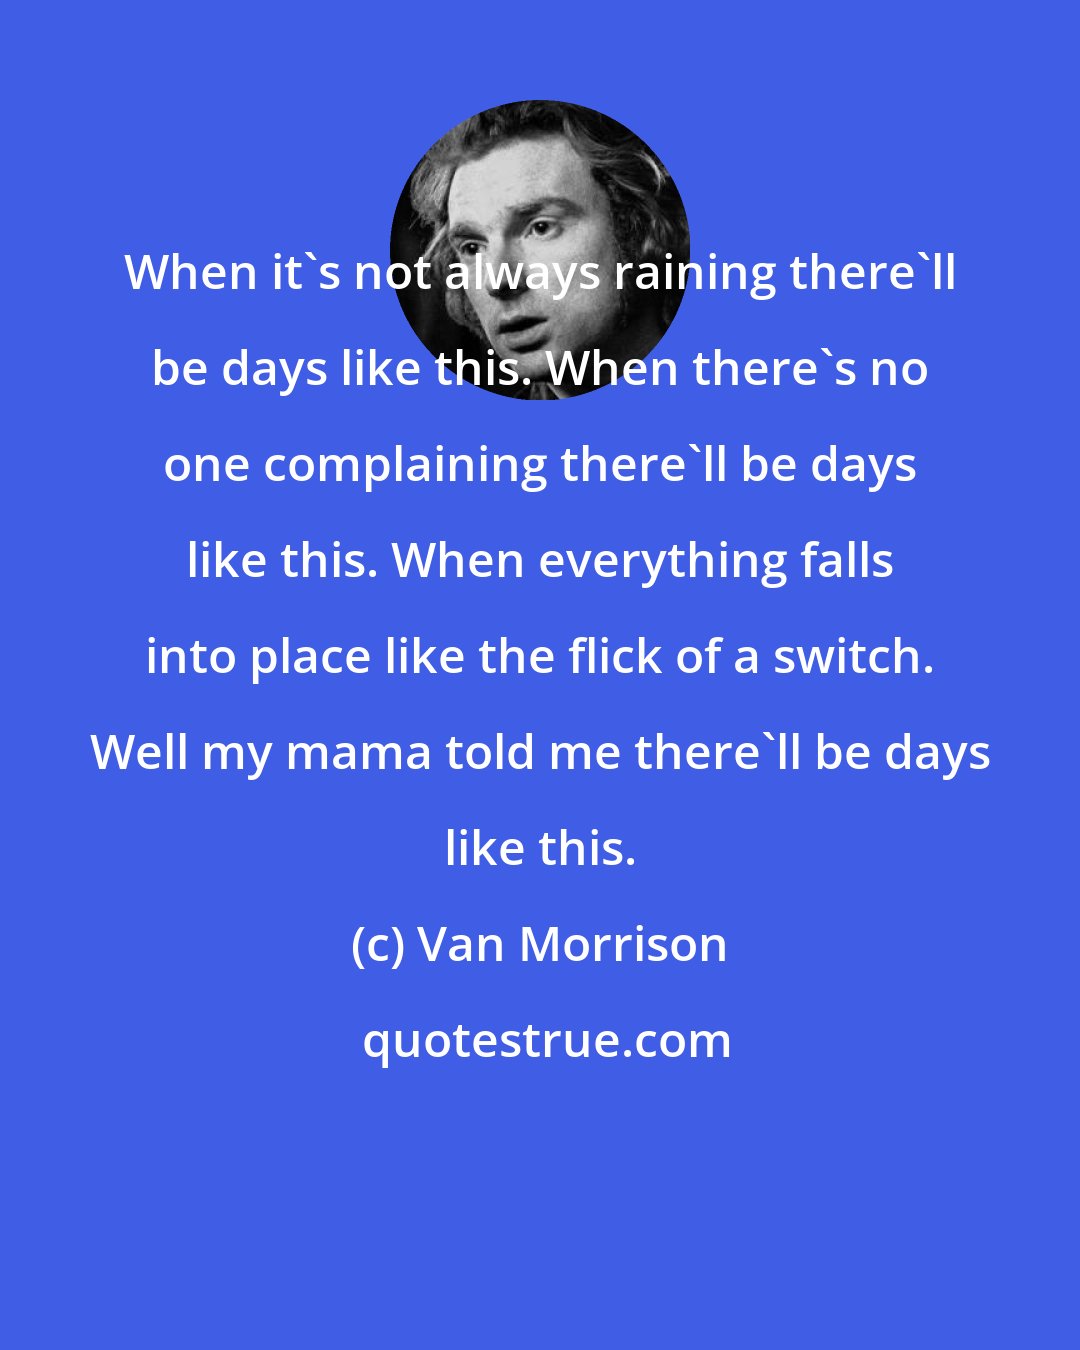 Van Morrison: When it's not always raining there'll be days like this. When there's no one complaining there'll be days like this. When everything falls into place like the flick of a switch. Well my mama told me there'll be days like this.